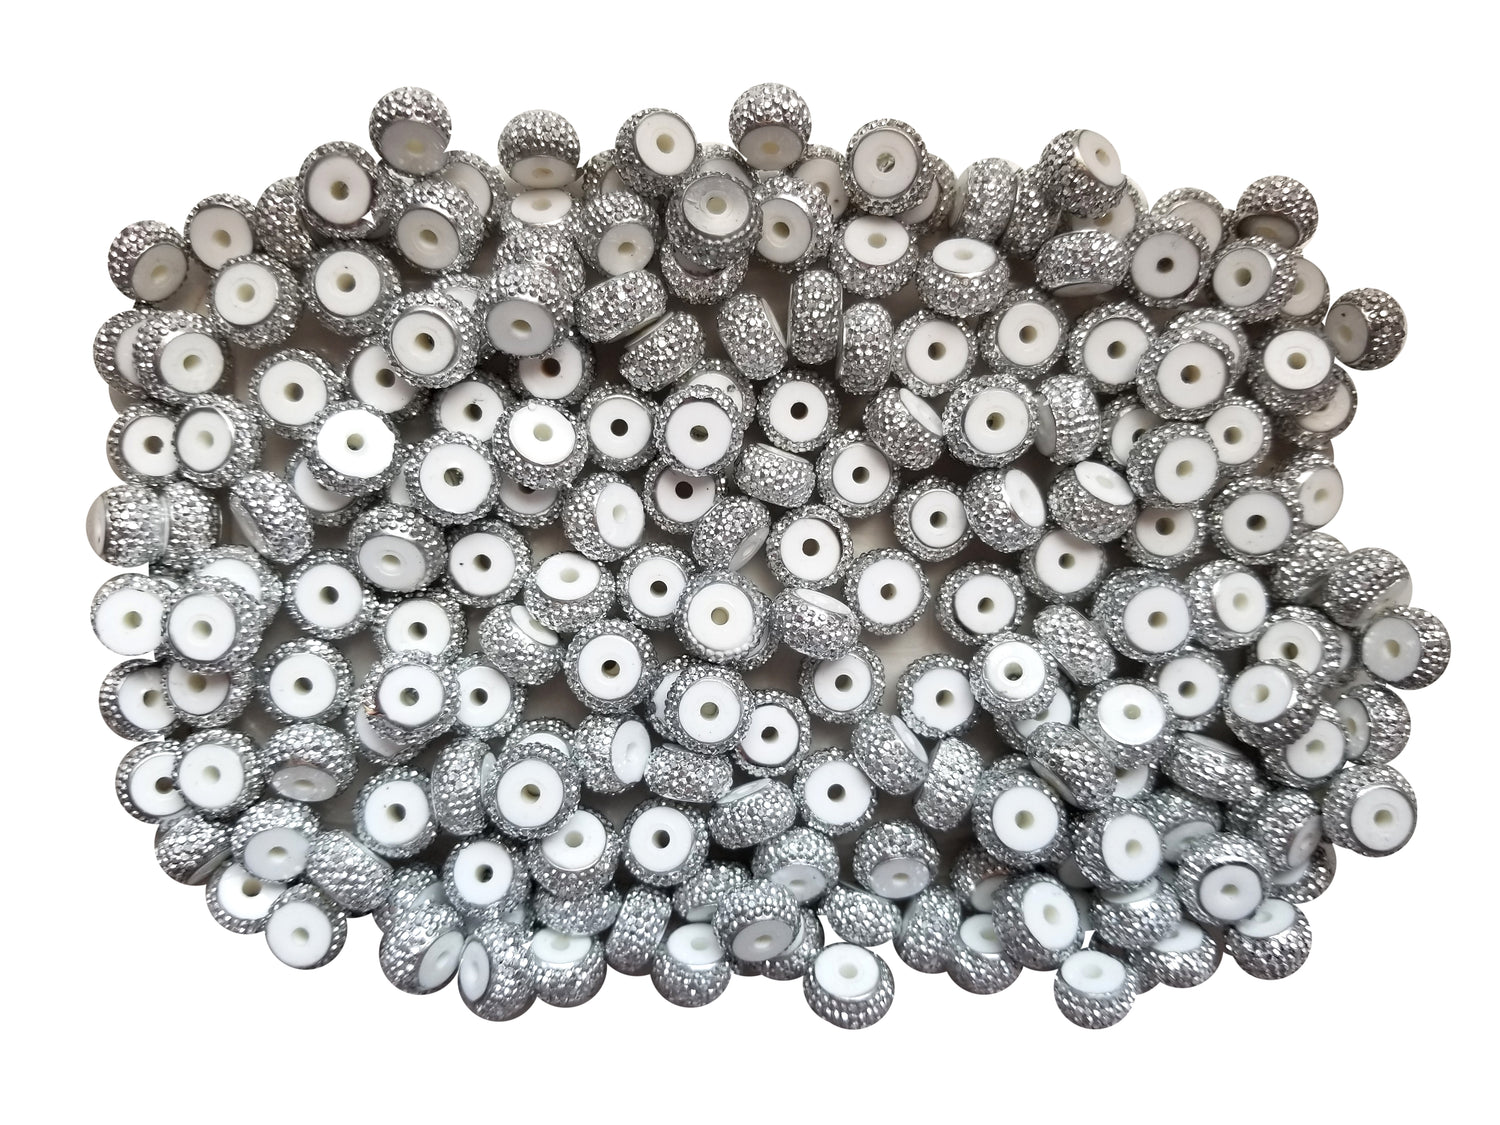 20pcs Mystic White Rhinestone Spacer Beads ,antique Silver Spacer